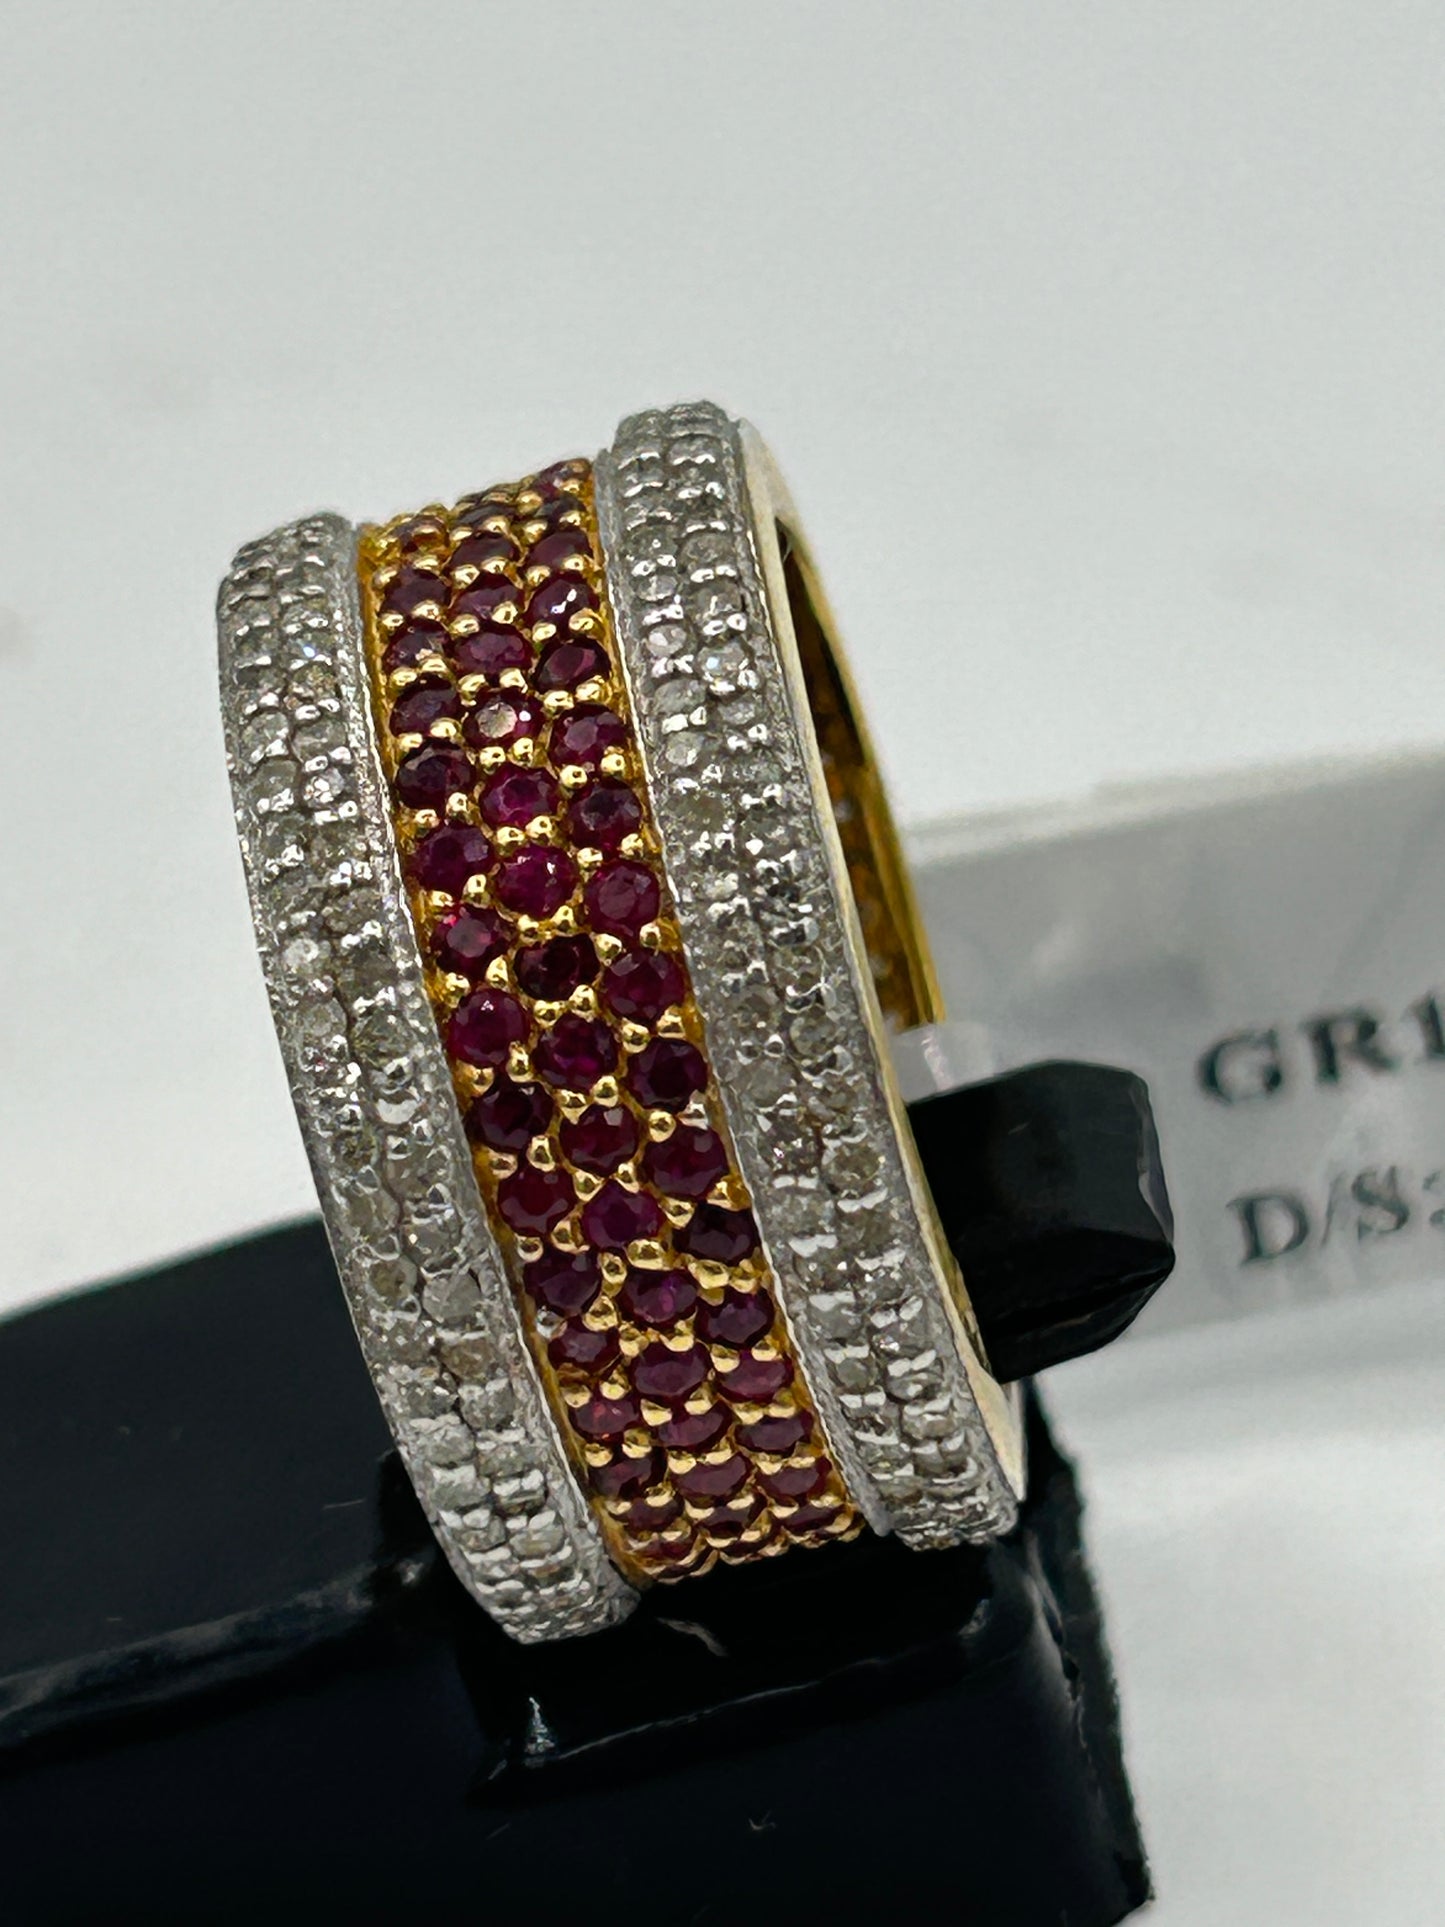 14k Solid Gold Diamond Rings. Genuine handmade pave diamond Rings. Approx Size 0.40 "(10 mm)